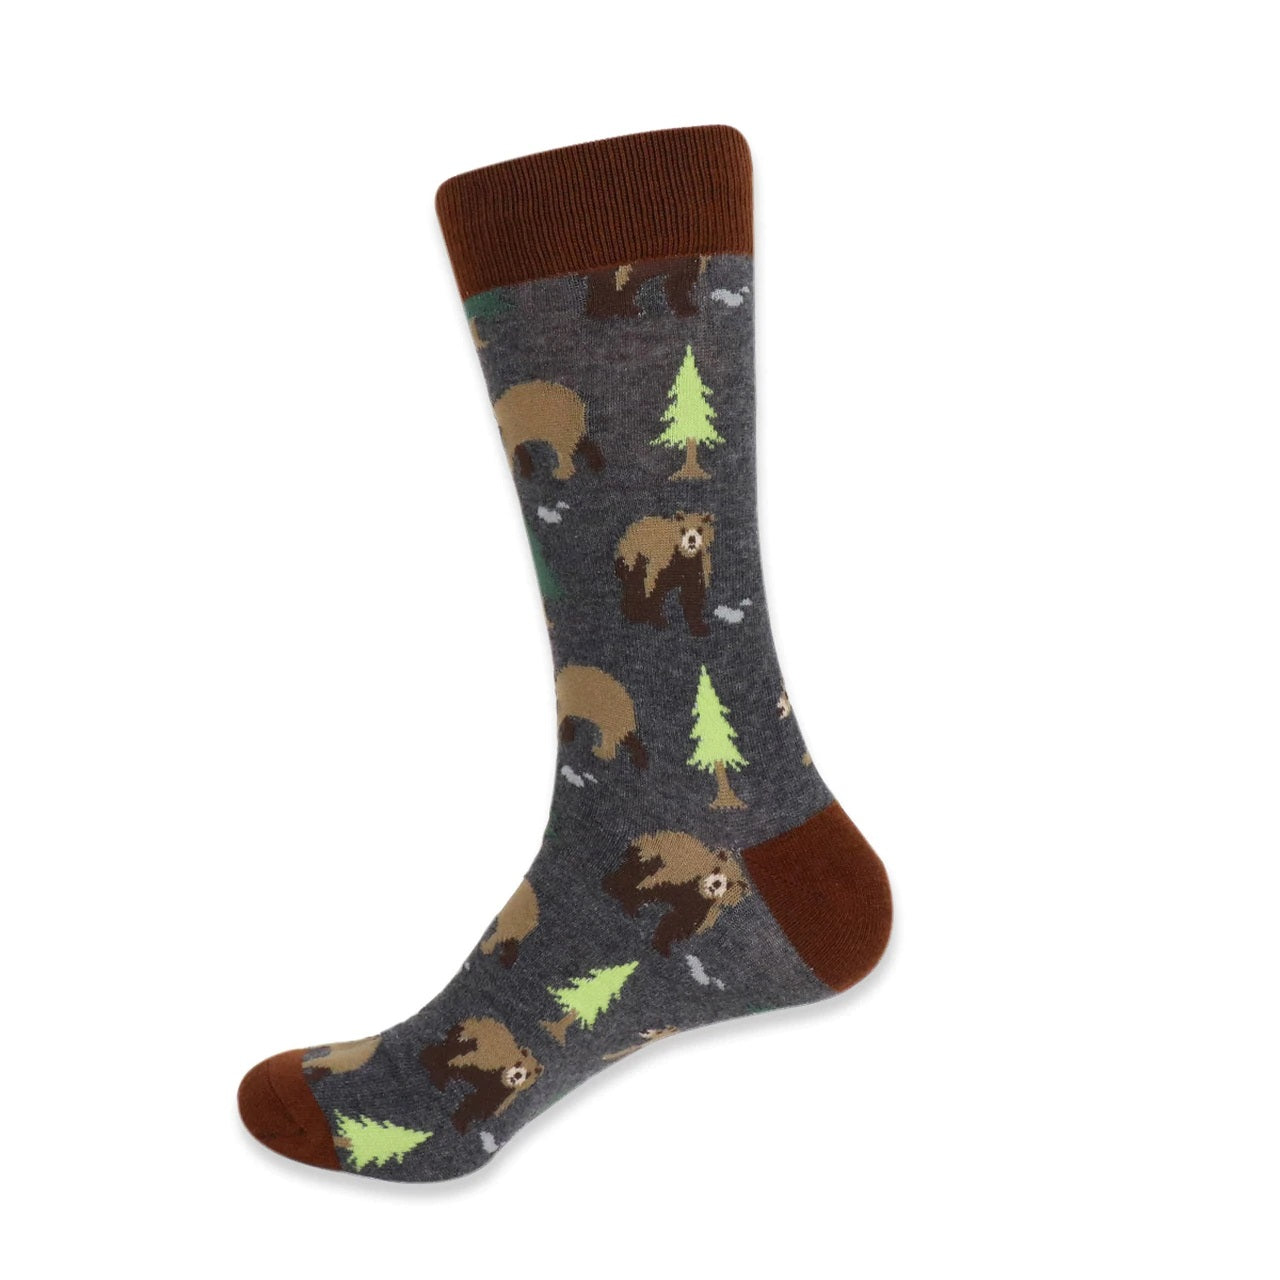 MashasCorner.com   Men's Novelty Bear Socks  Add some fun to your outfit with our Novelty Socks. These socks are perfect for when you have to maintain being a professional but still have that burning desire to be fun & silly! These socks are super soft & comfy.  70% Cotton, 25% Polyester, 5% spandex Sock size: 10-13 Shoe size: 6-12.5 Machine wash, tumble dry low Imported